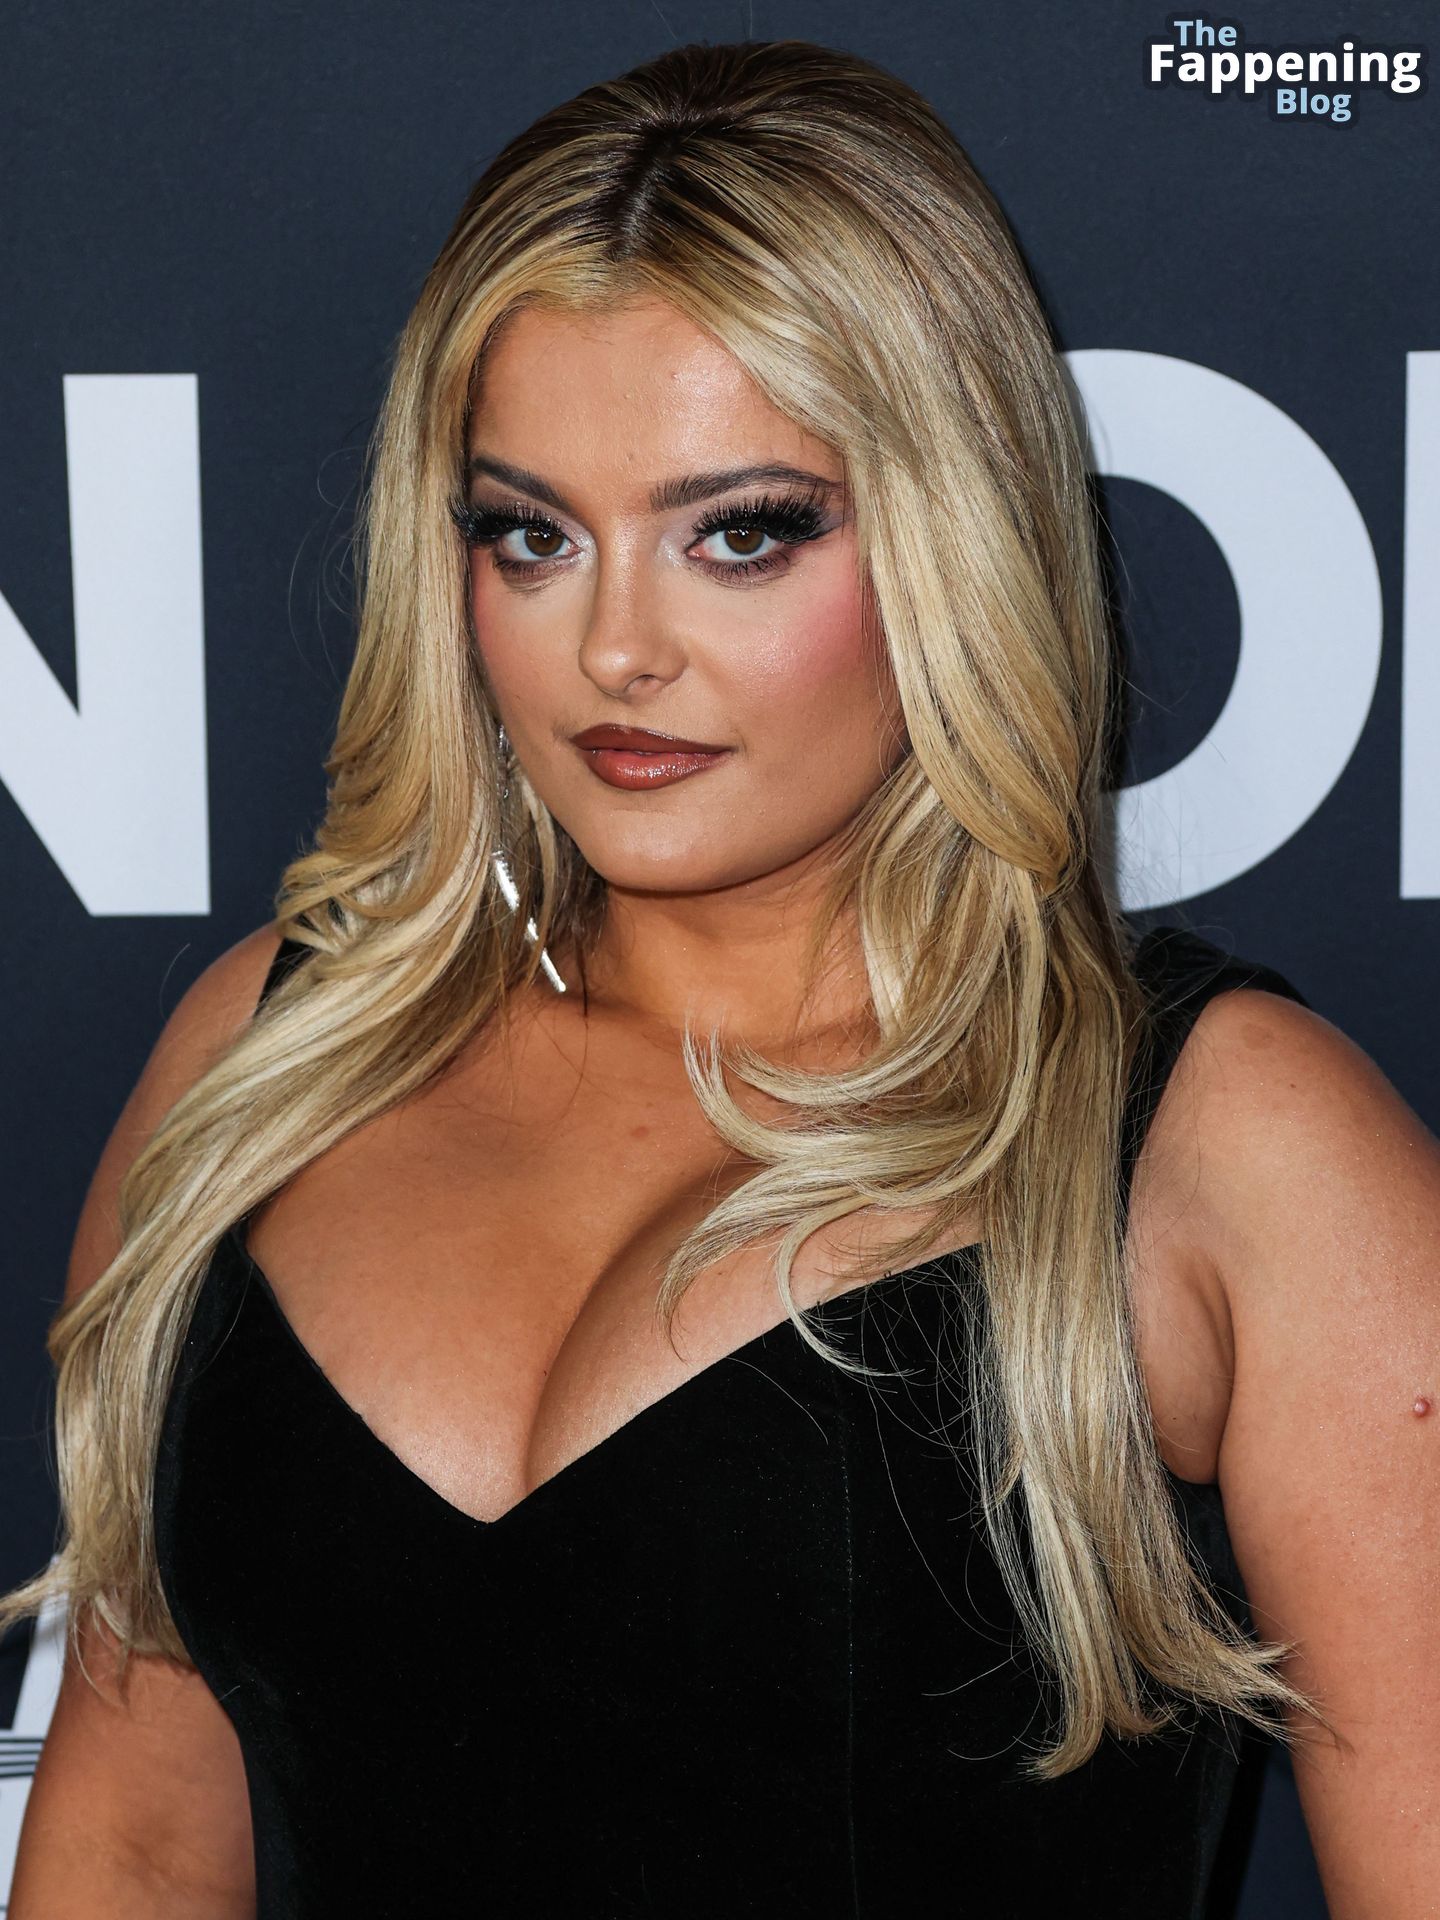 Bebe Rexha Shows Off Her Deep Cleavage at the MusiCares Gala (56 Photos)